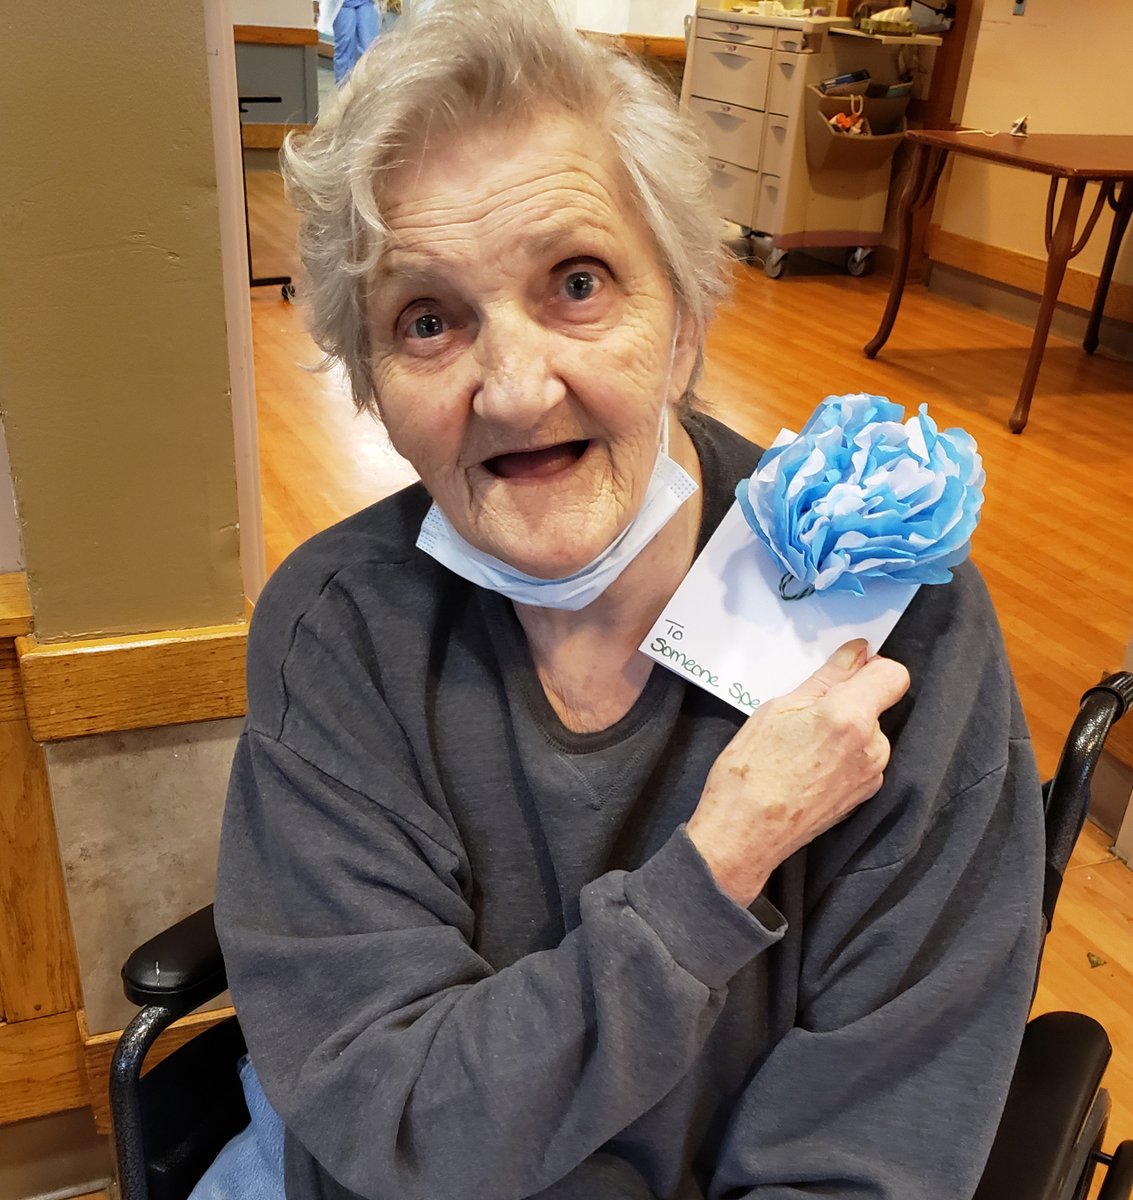 A special THANK YOU the Fomenko family for making these creative greeting cards for the residents to brighten their day! #HarrisHillNursingFacility